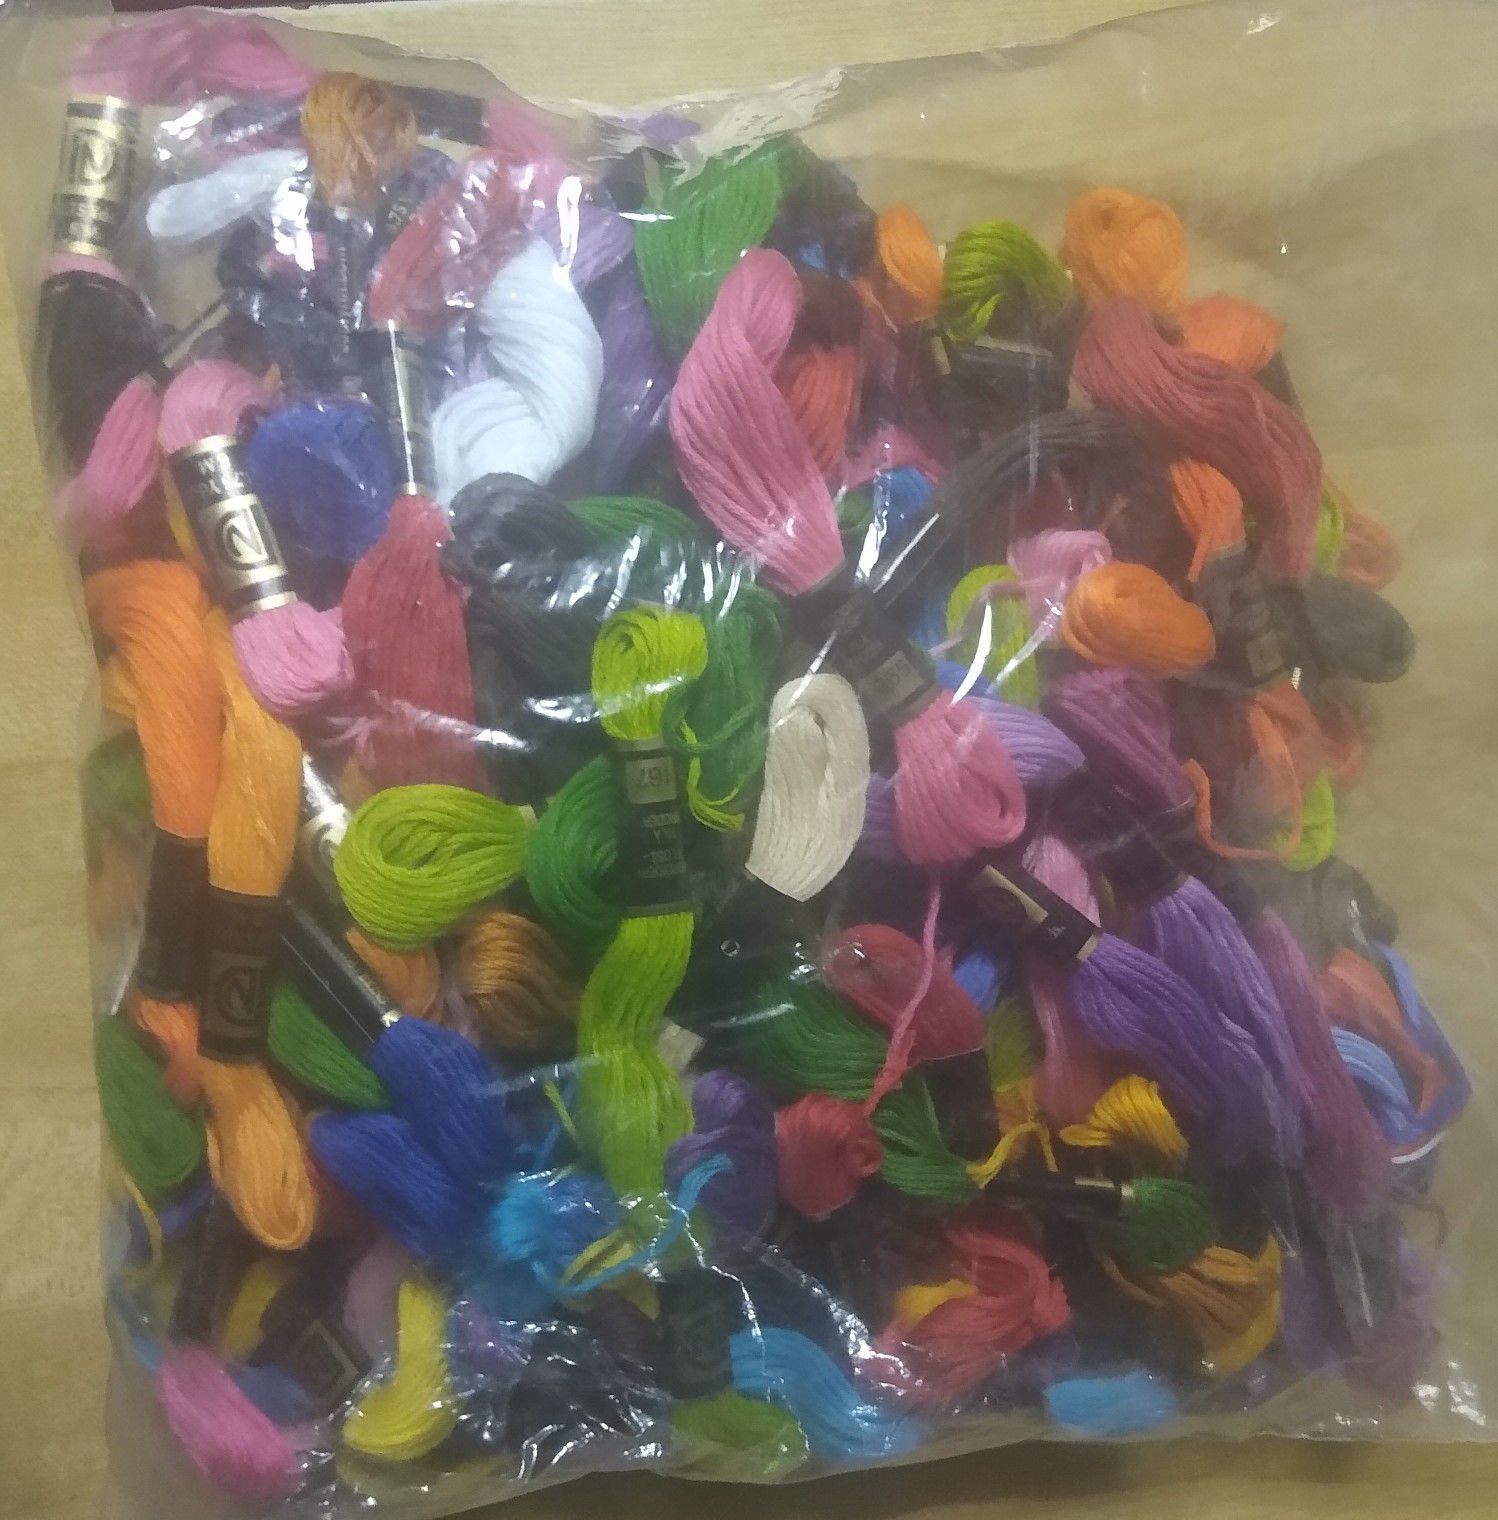 Appx 100 Skeins of Embroidery Floss